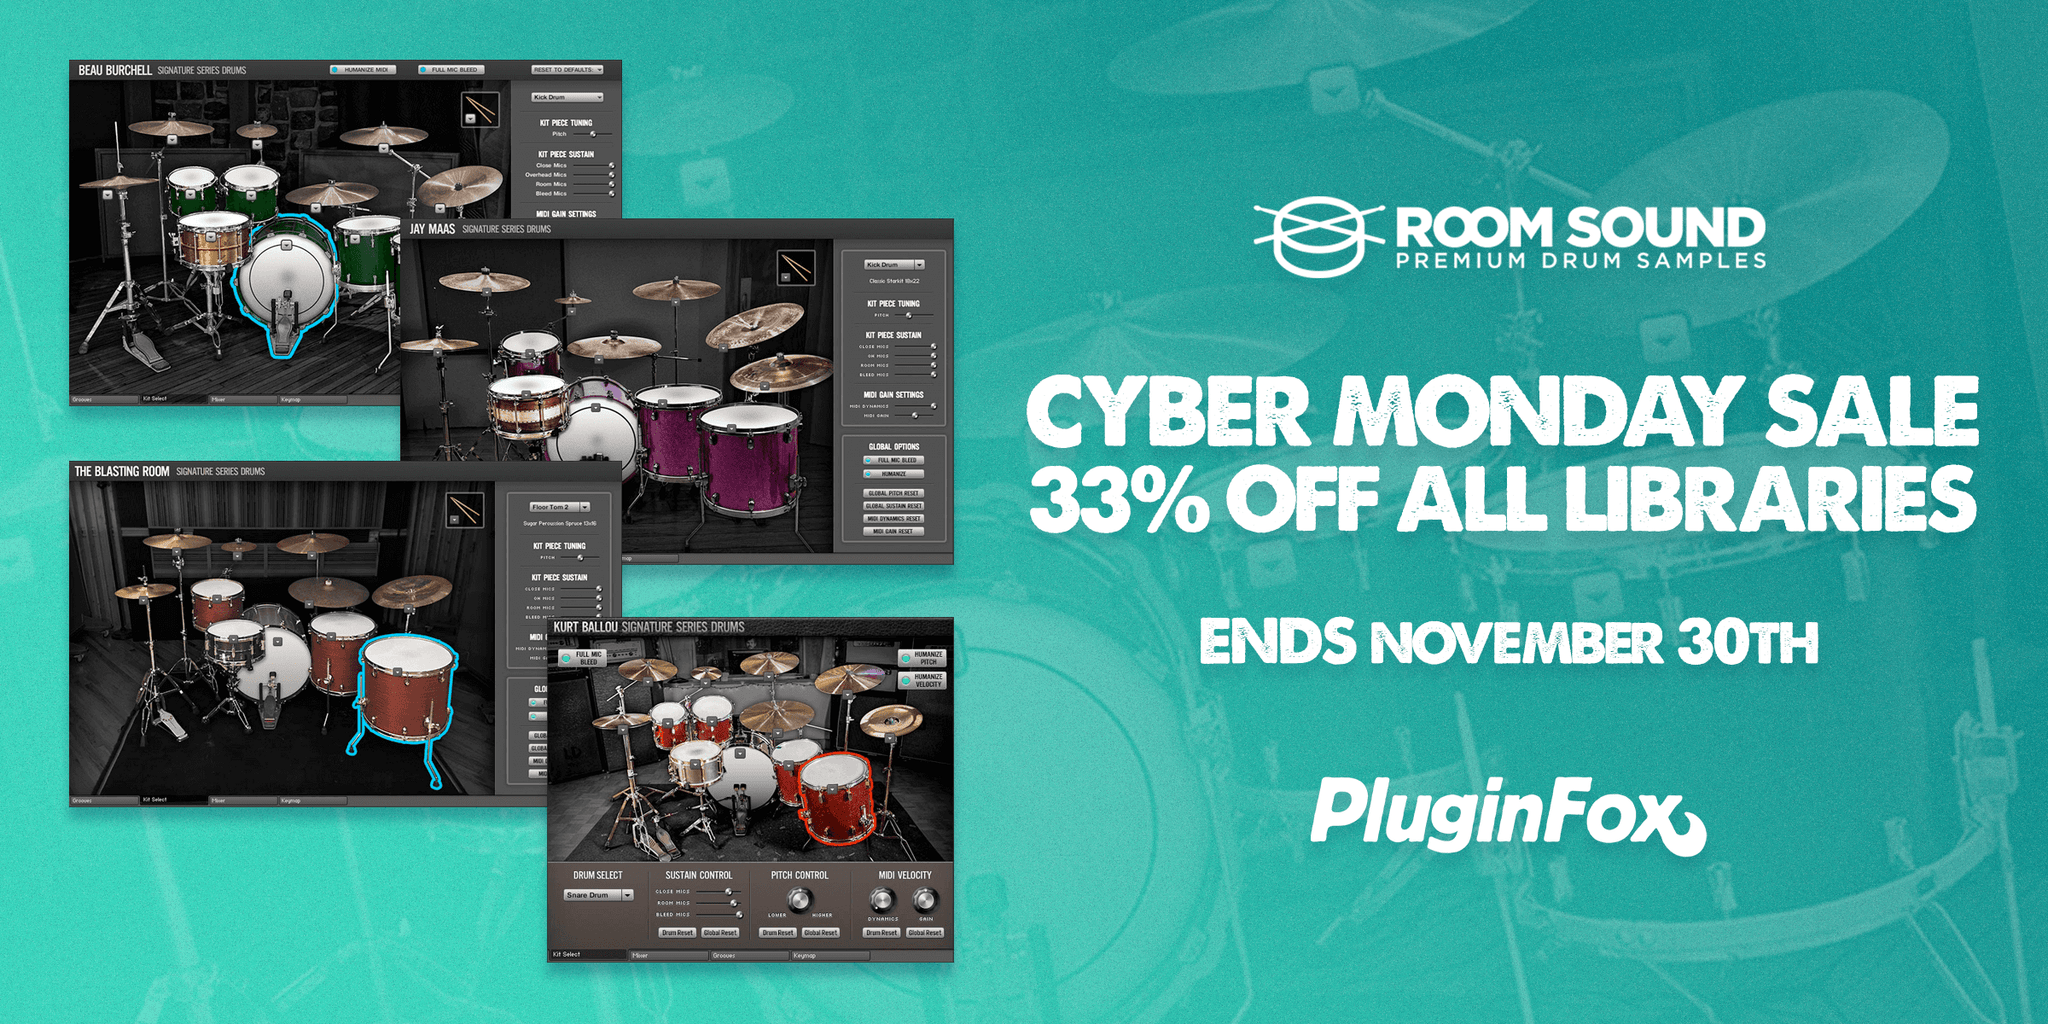 Room Sound Cyber Monday Sale - PluginFox Exclusive